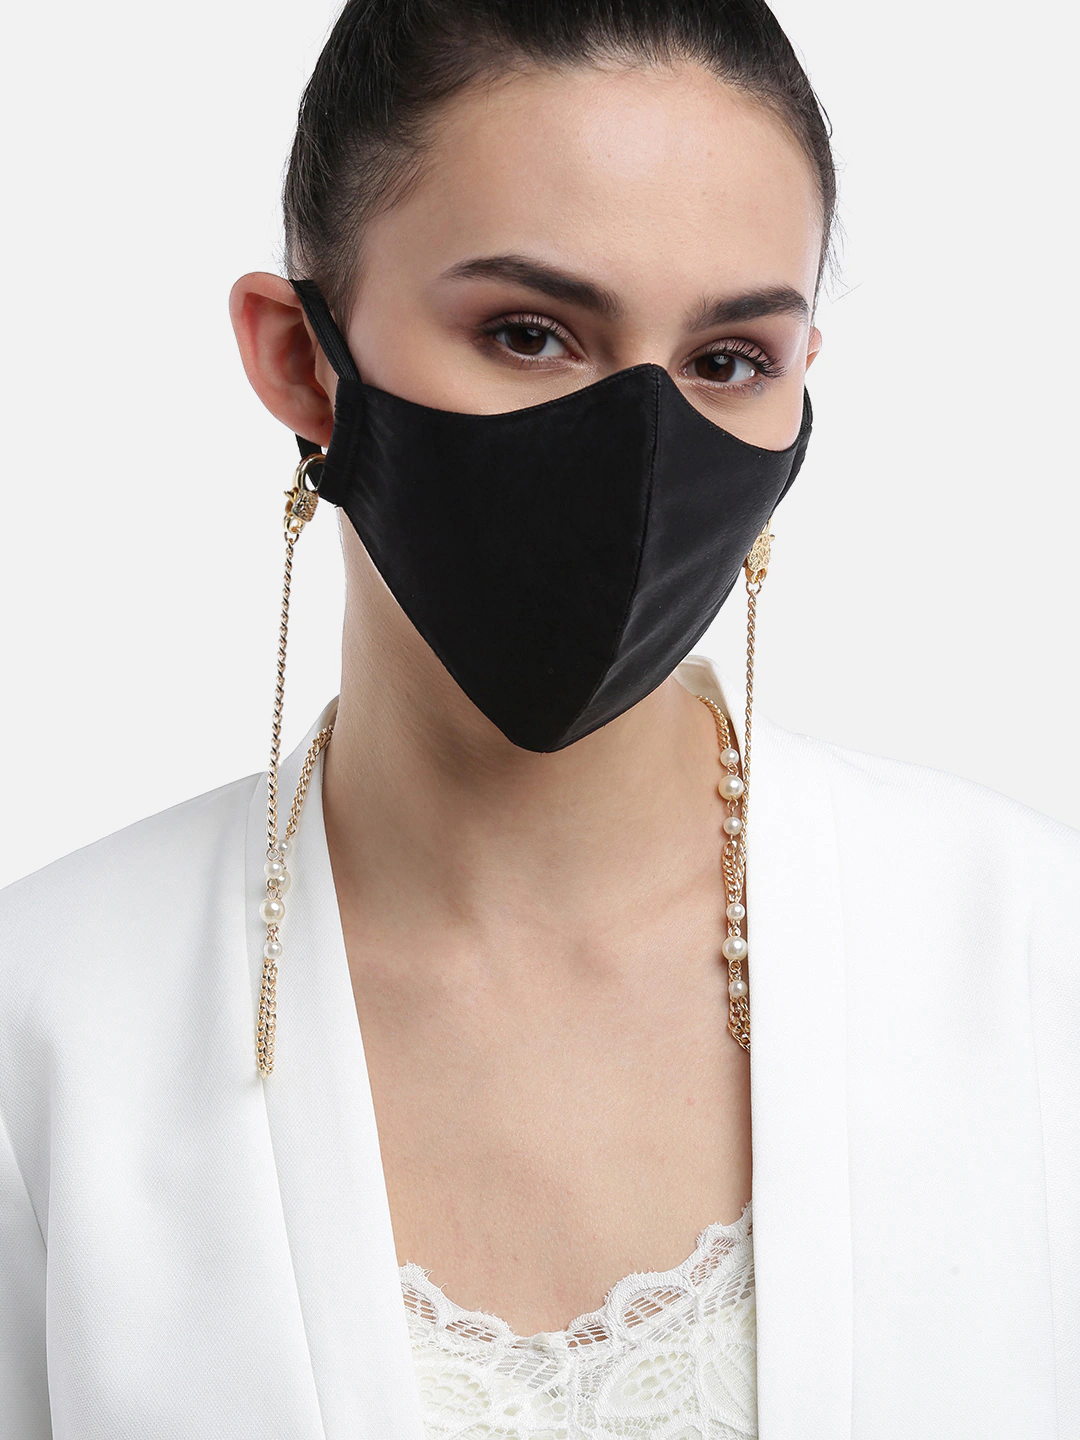 Blueberry solid black satin mask with Mask Holder Chain Strap